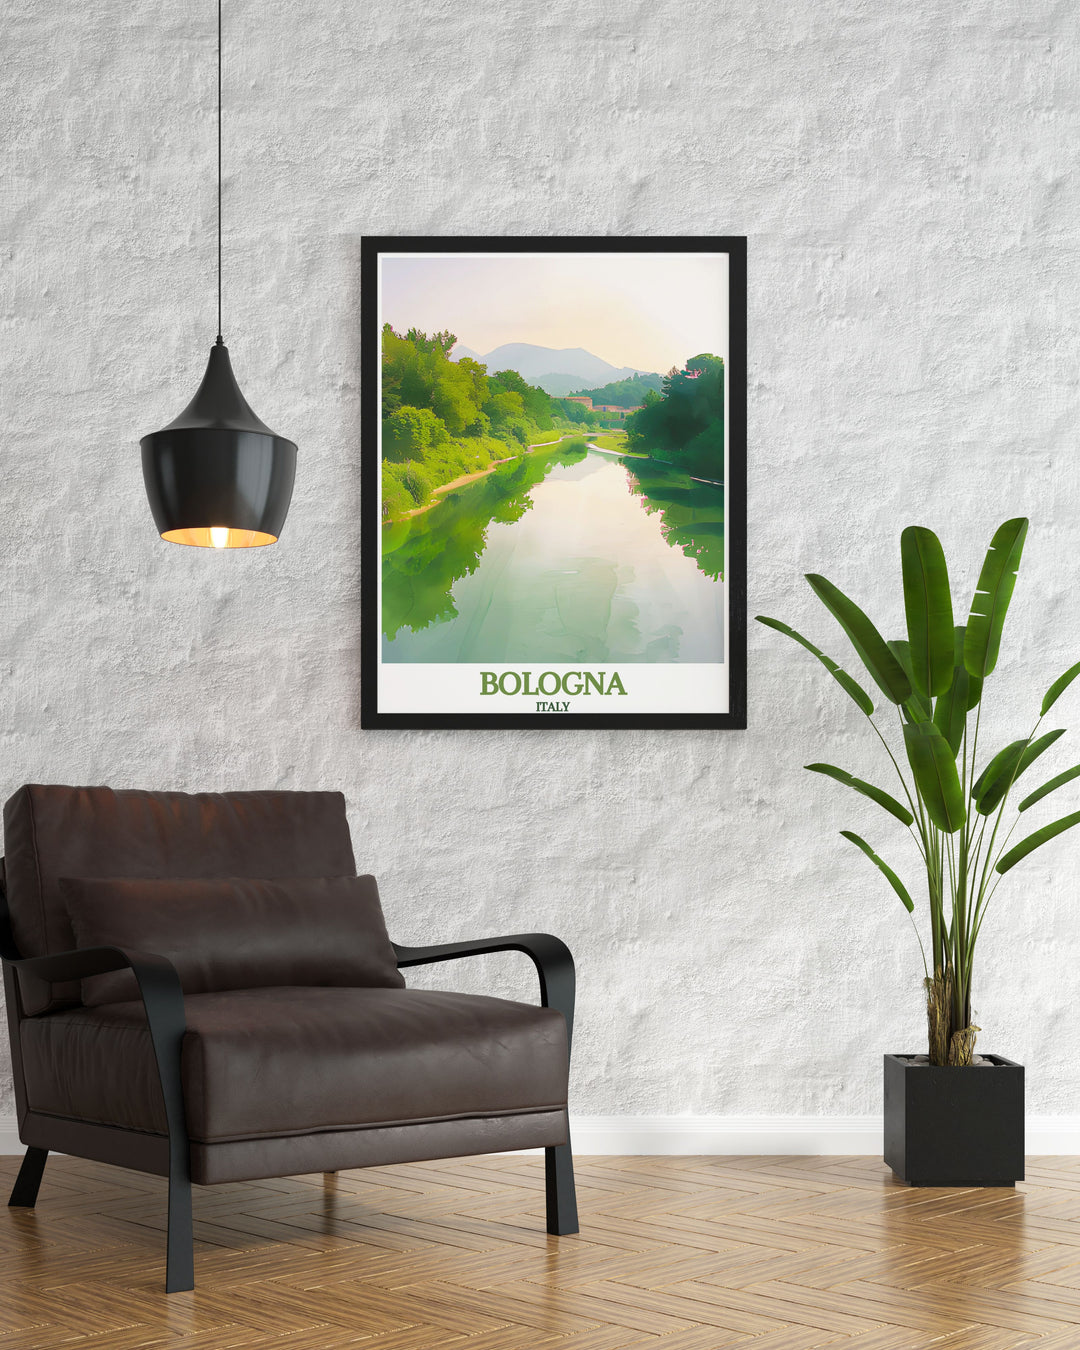 Elegant Bologna wall art depicting the Two Towers and the scenic Reno River, showcasing the citys urban charm and natural tranquility. Perfect for adding sophistication to any room.